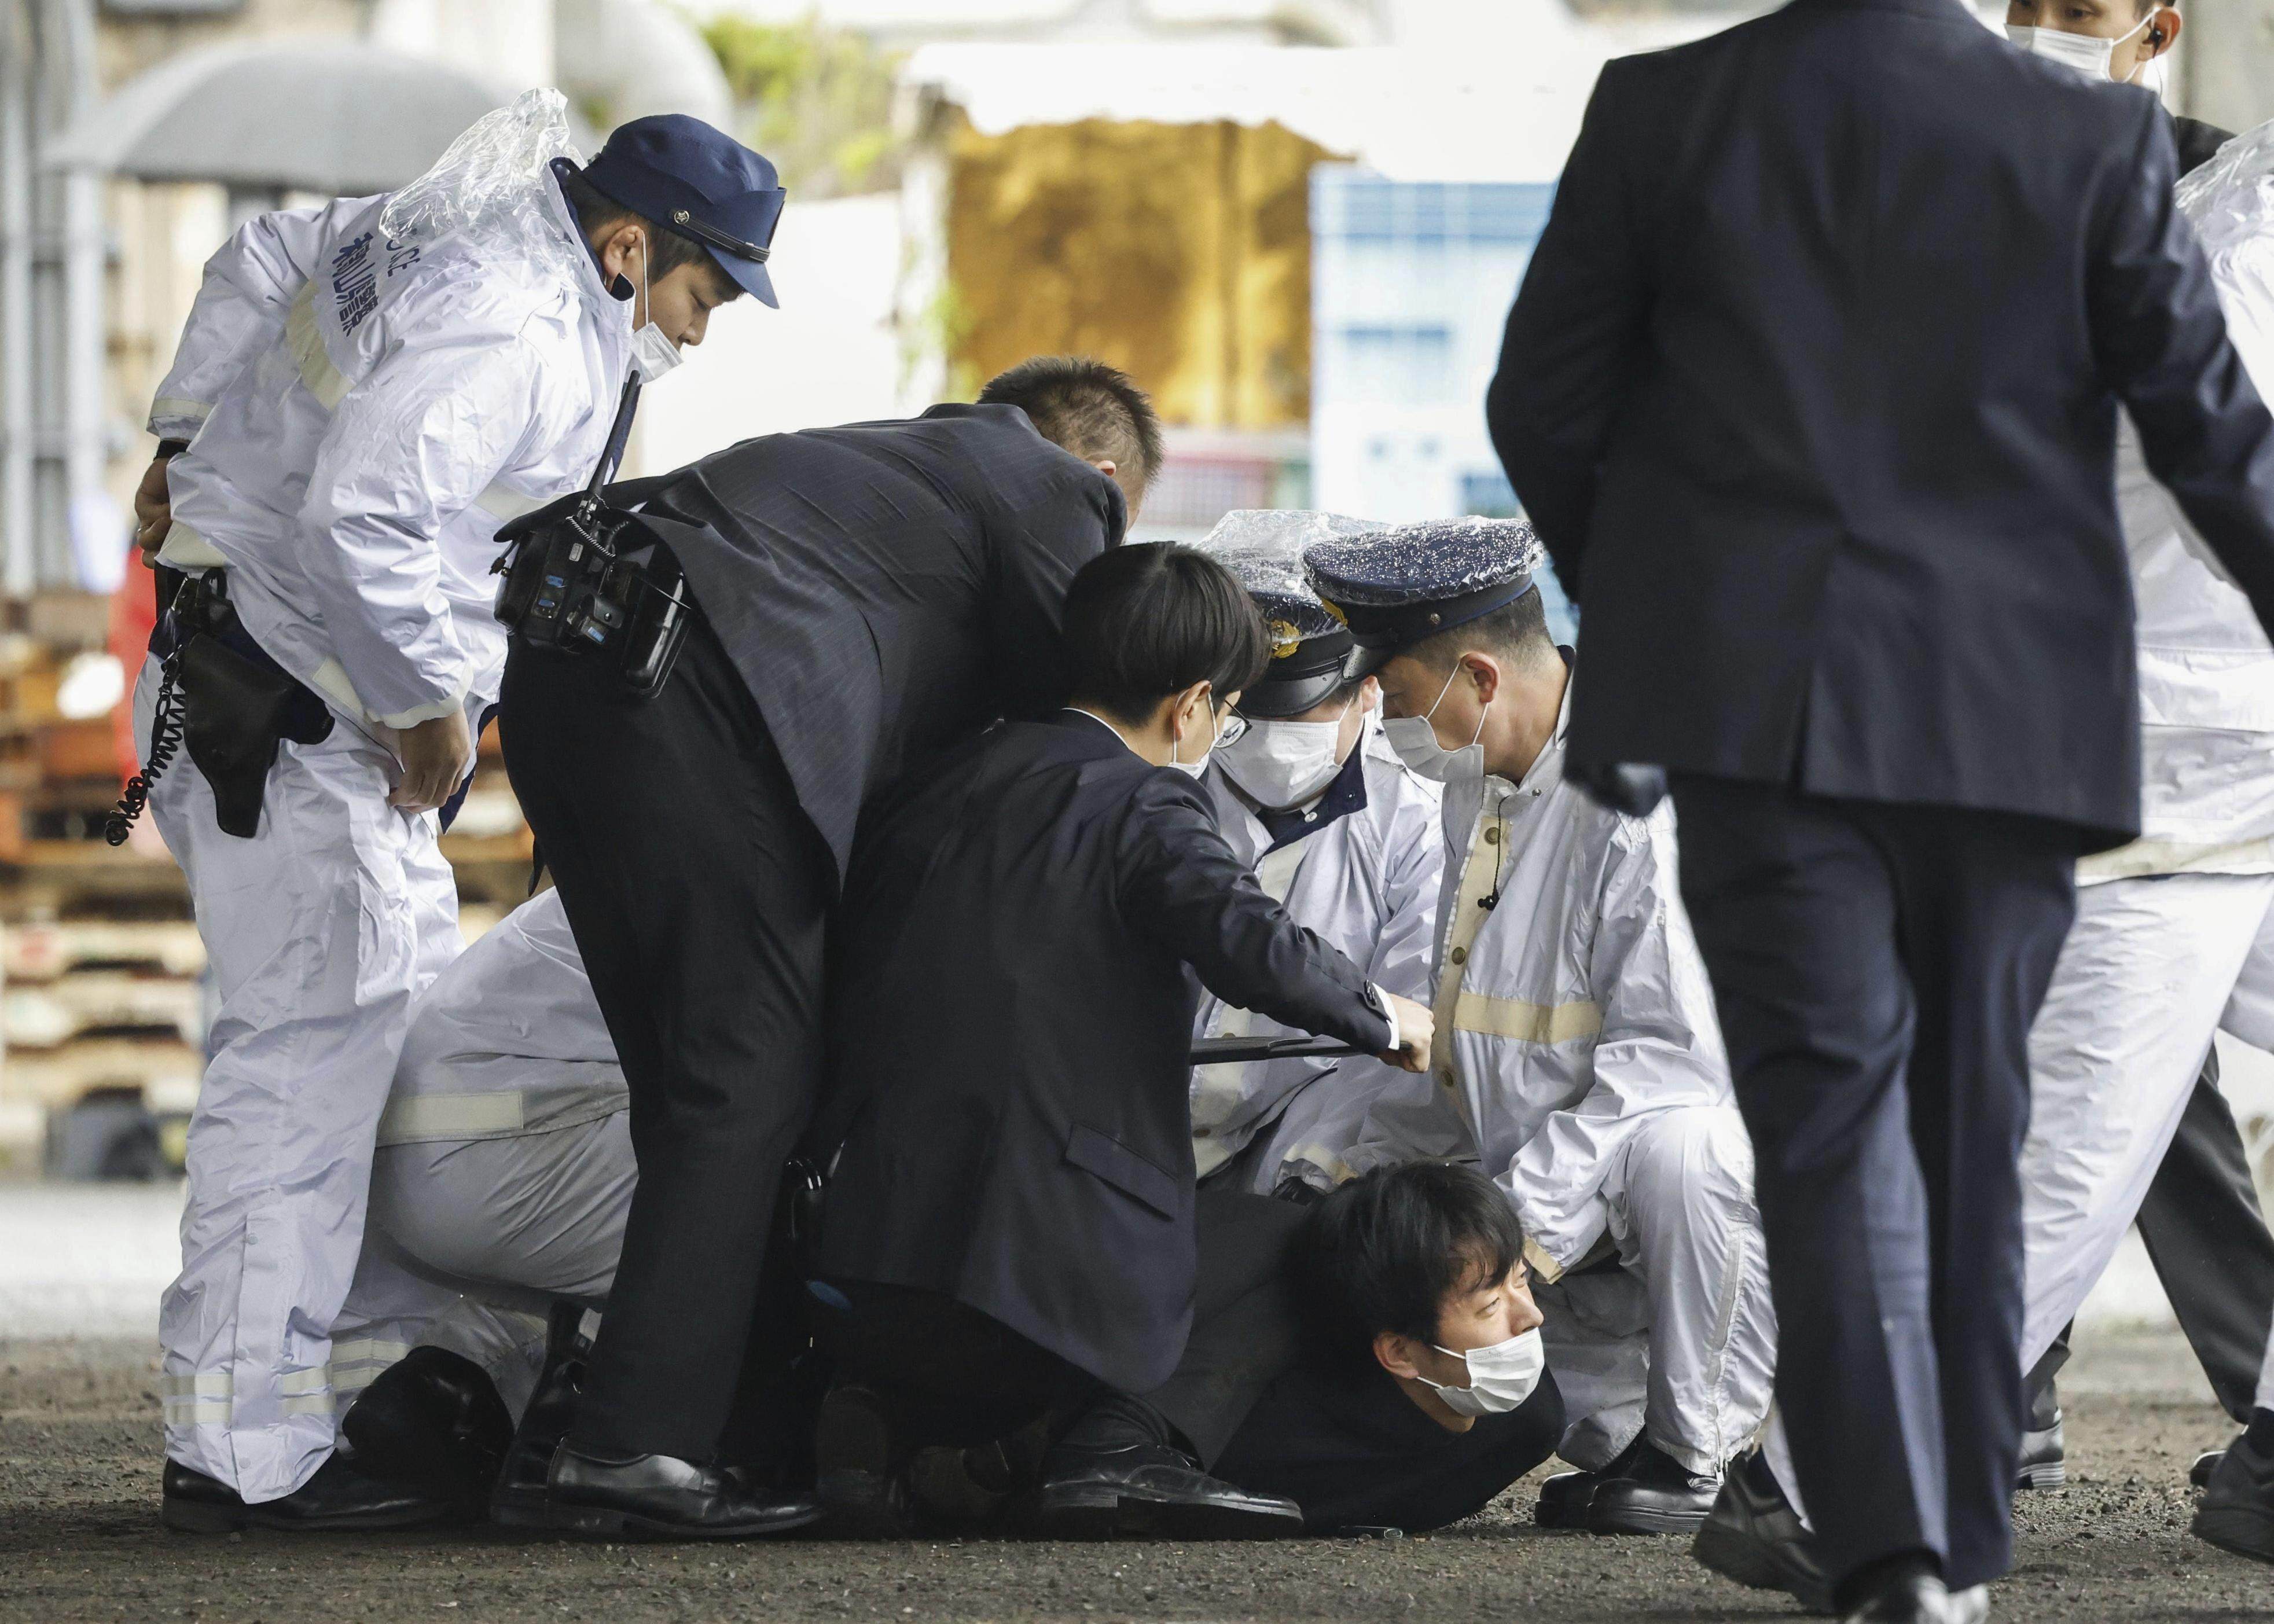 A man accused of throwing the smoke bomb at Japanese Prime Minister Fumio Kishida is restrained by police in Saikazaki on Saturday. Photo: Kyodo News via AP